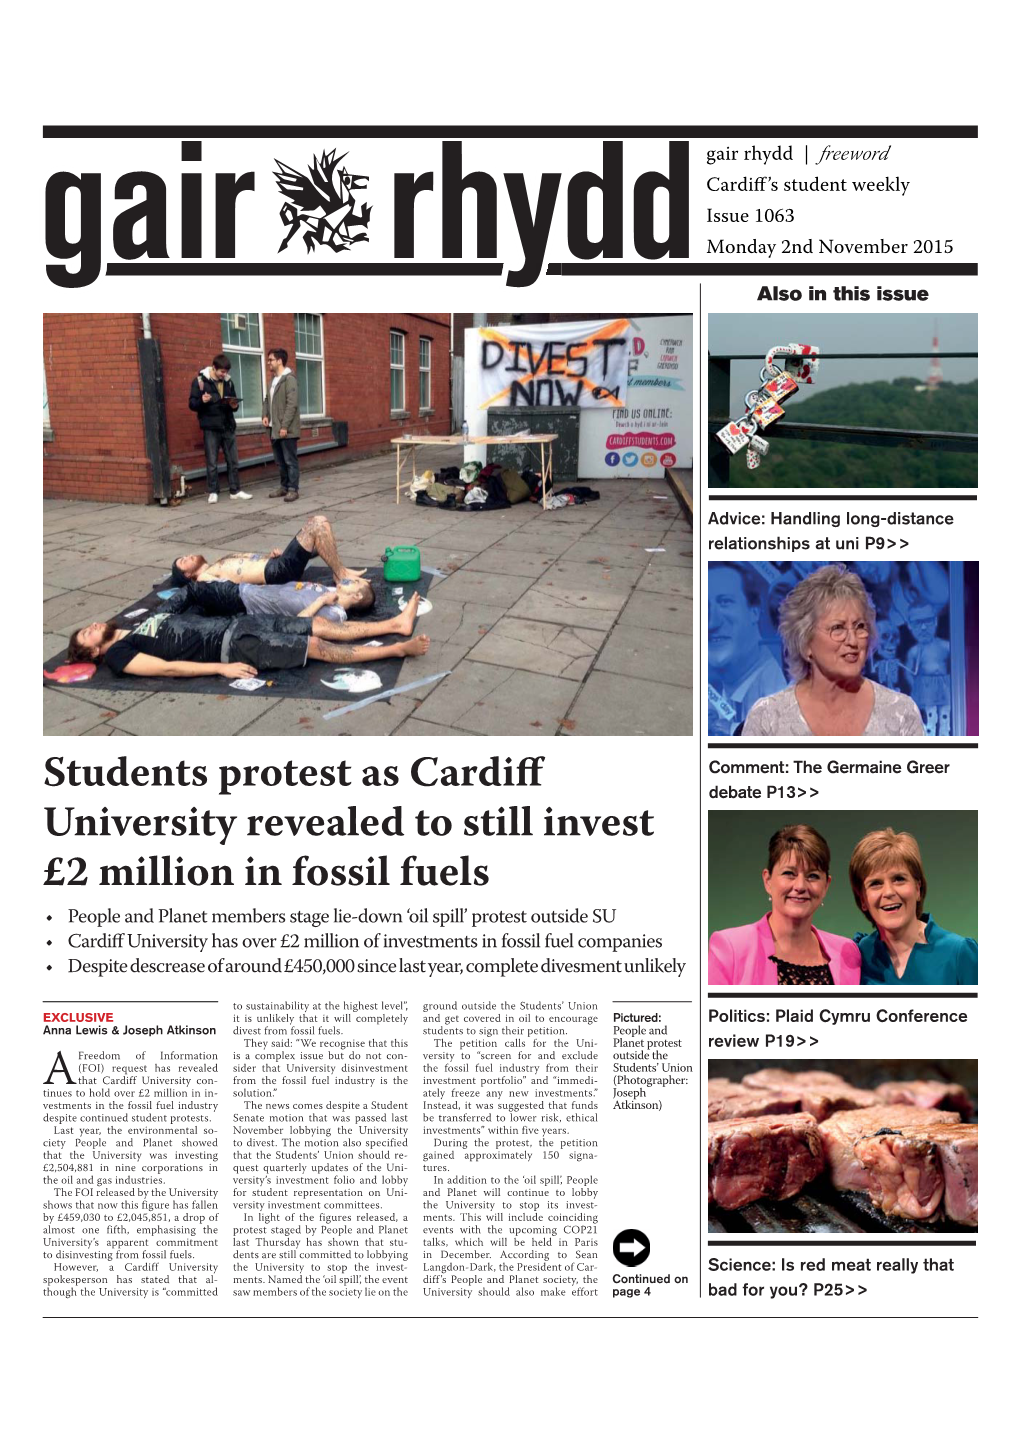 Students Protest As Cardiff University Revealed to Still Invest £2 Million In